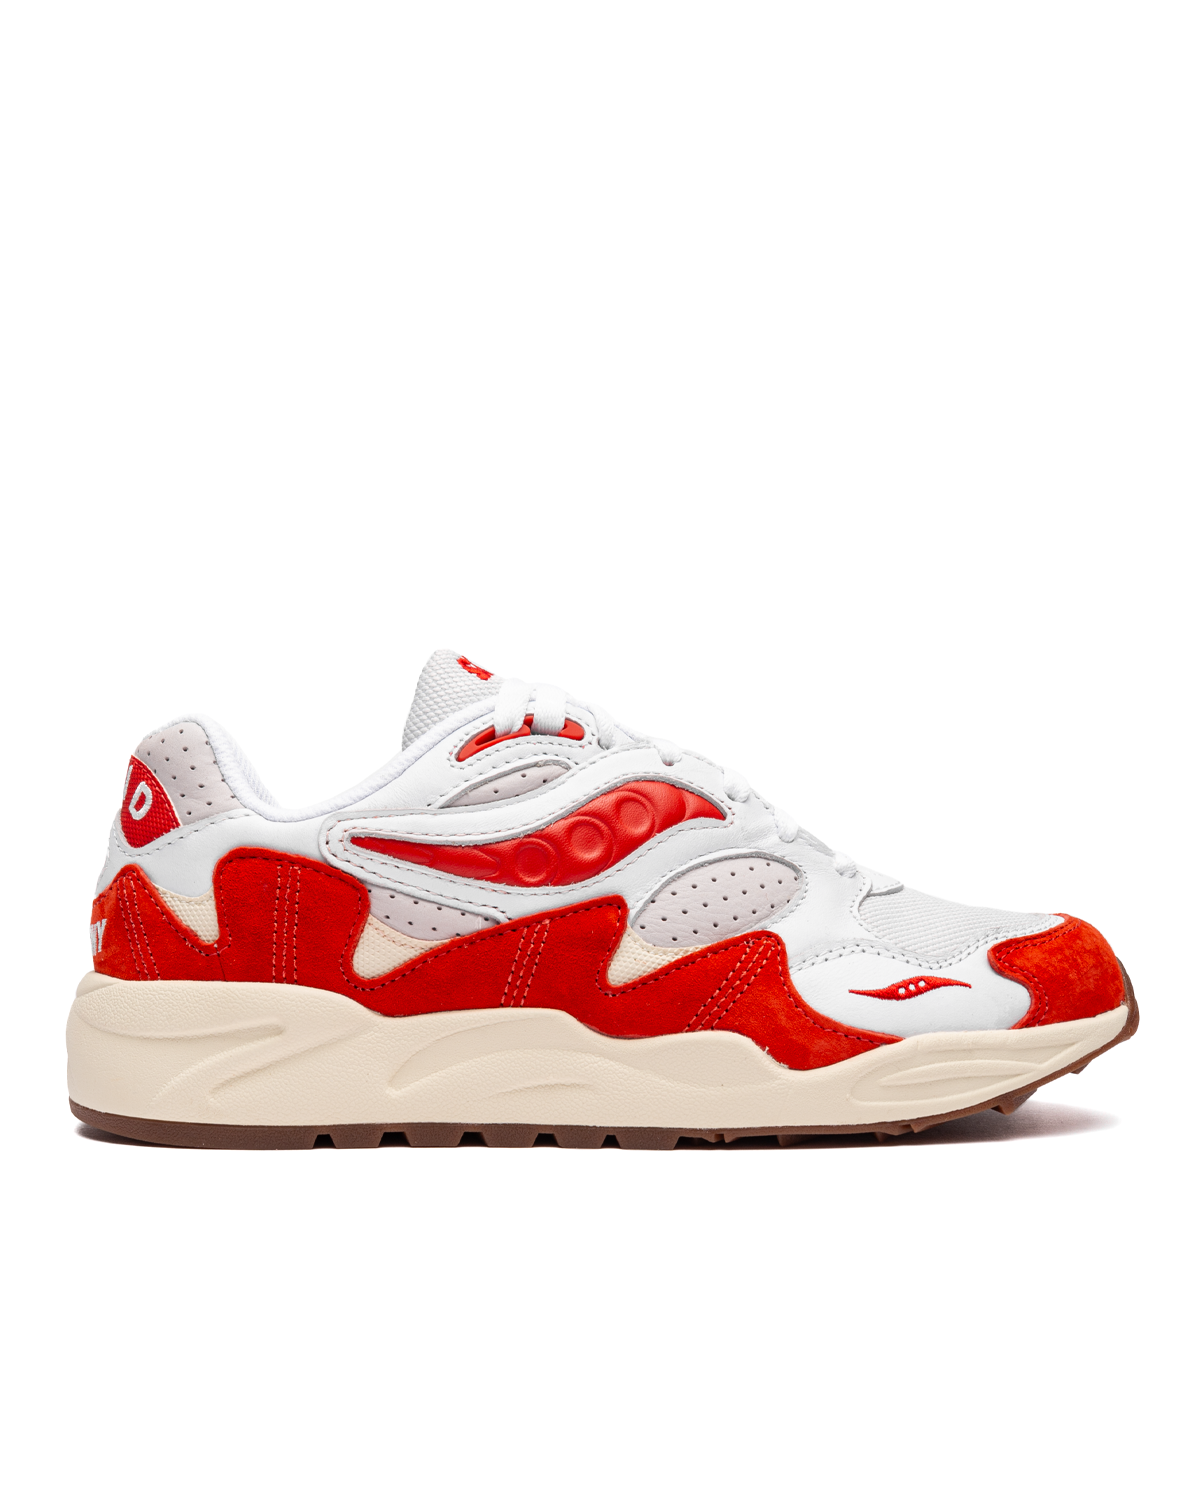 Grid Shadow 2 White/Red